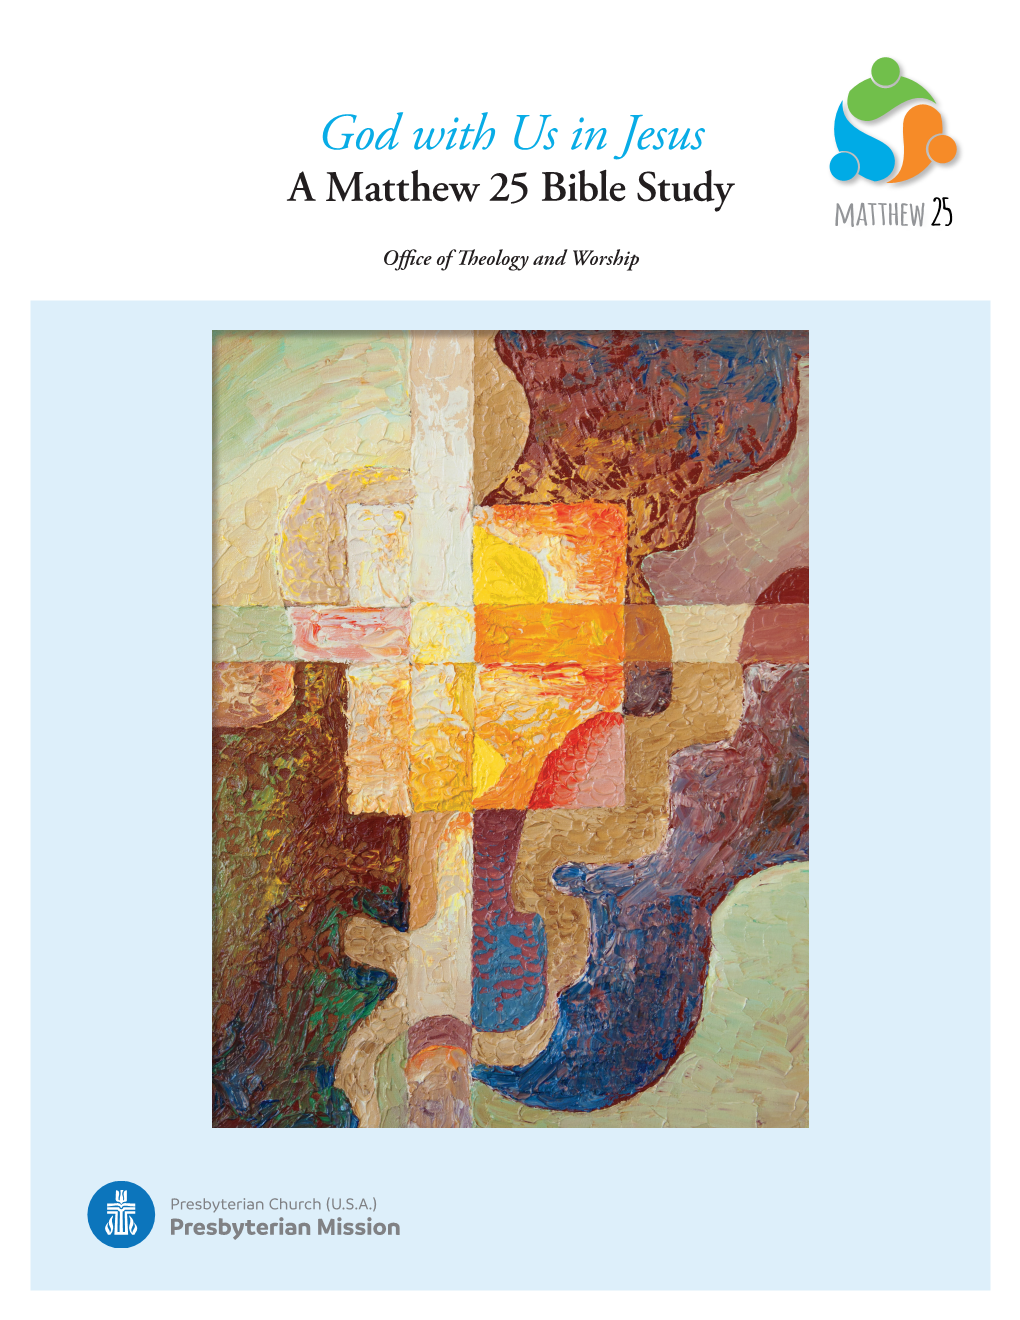 God with Us in Jesus: a Matthew 25 Bible Study